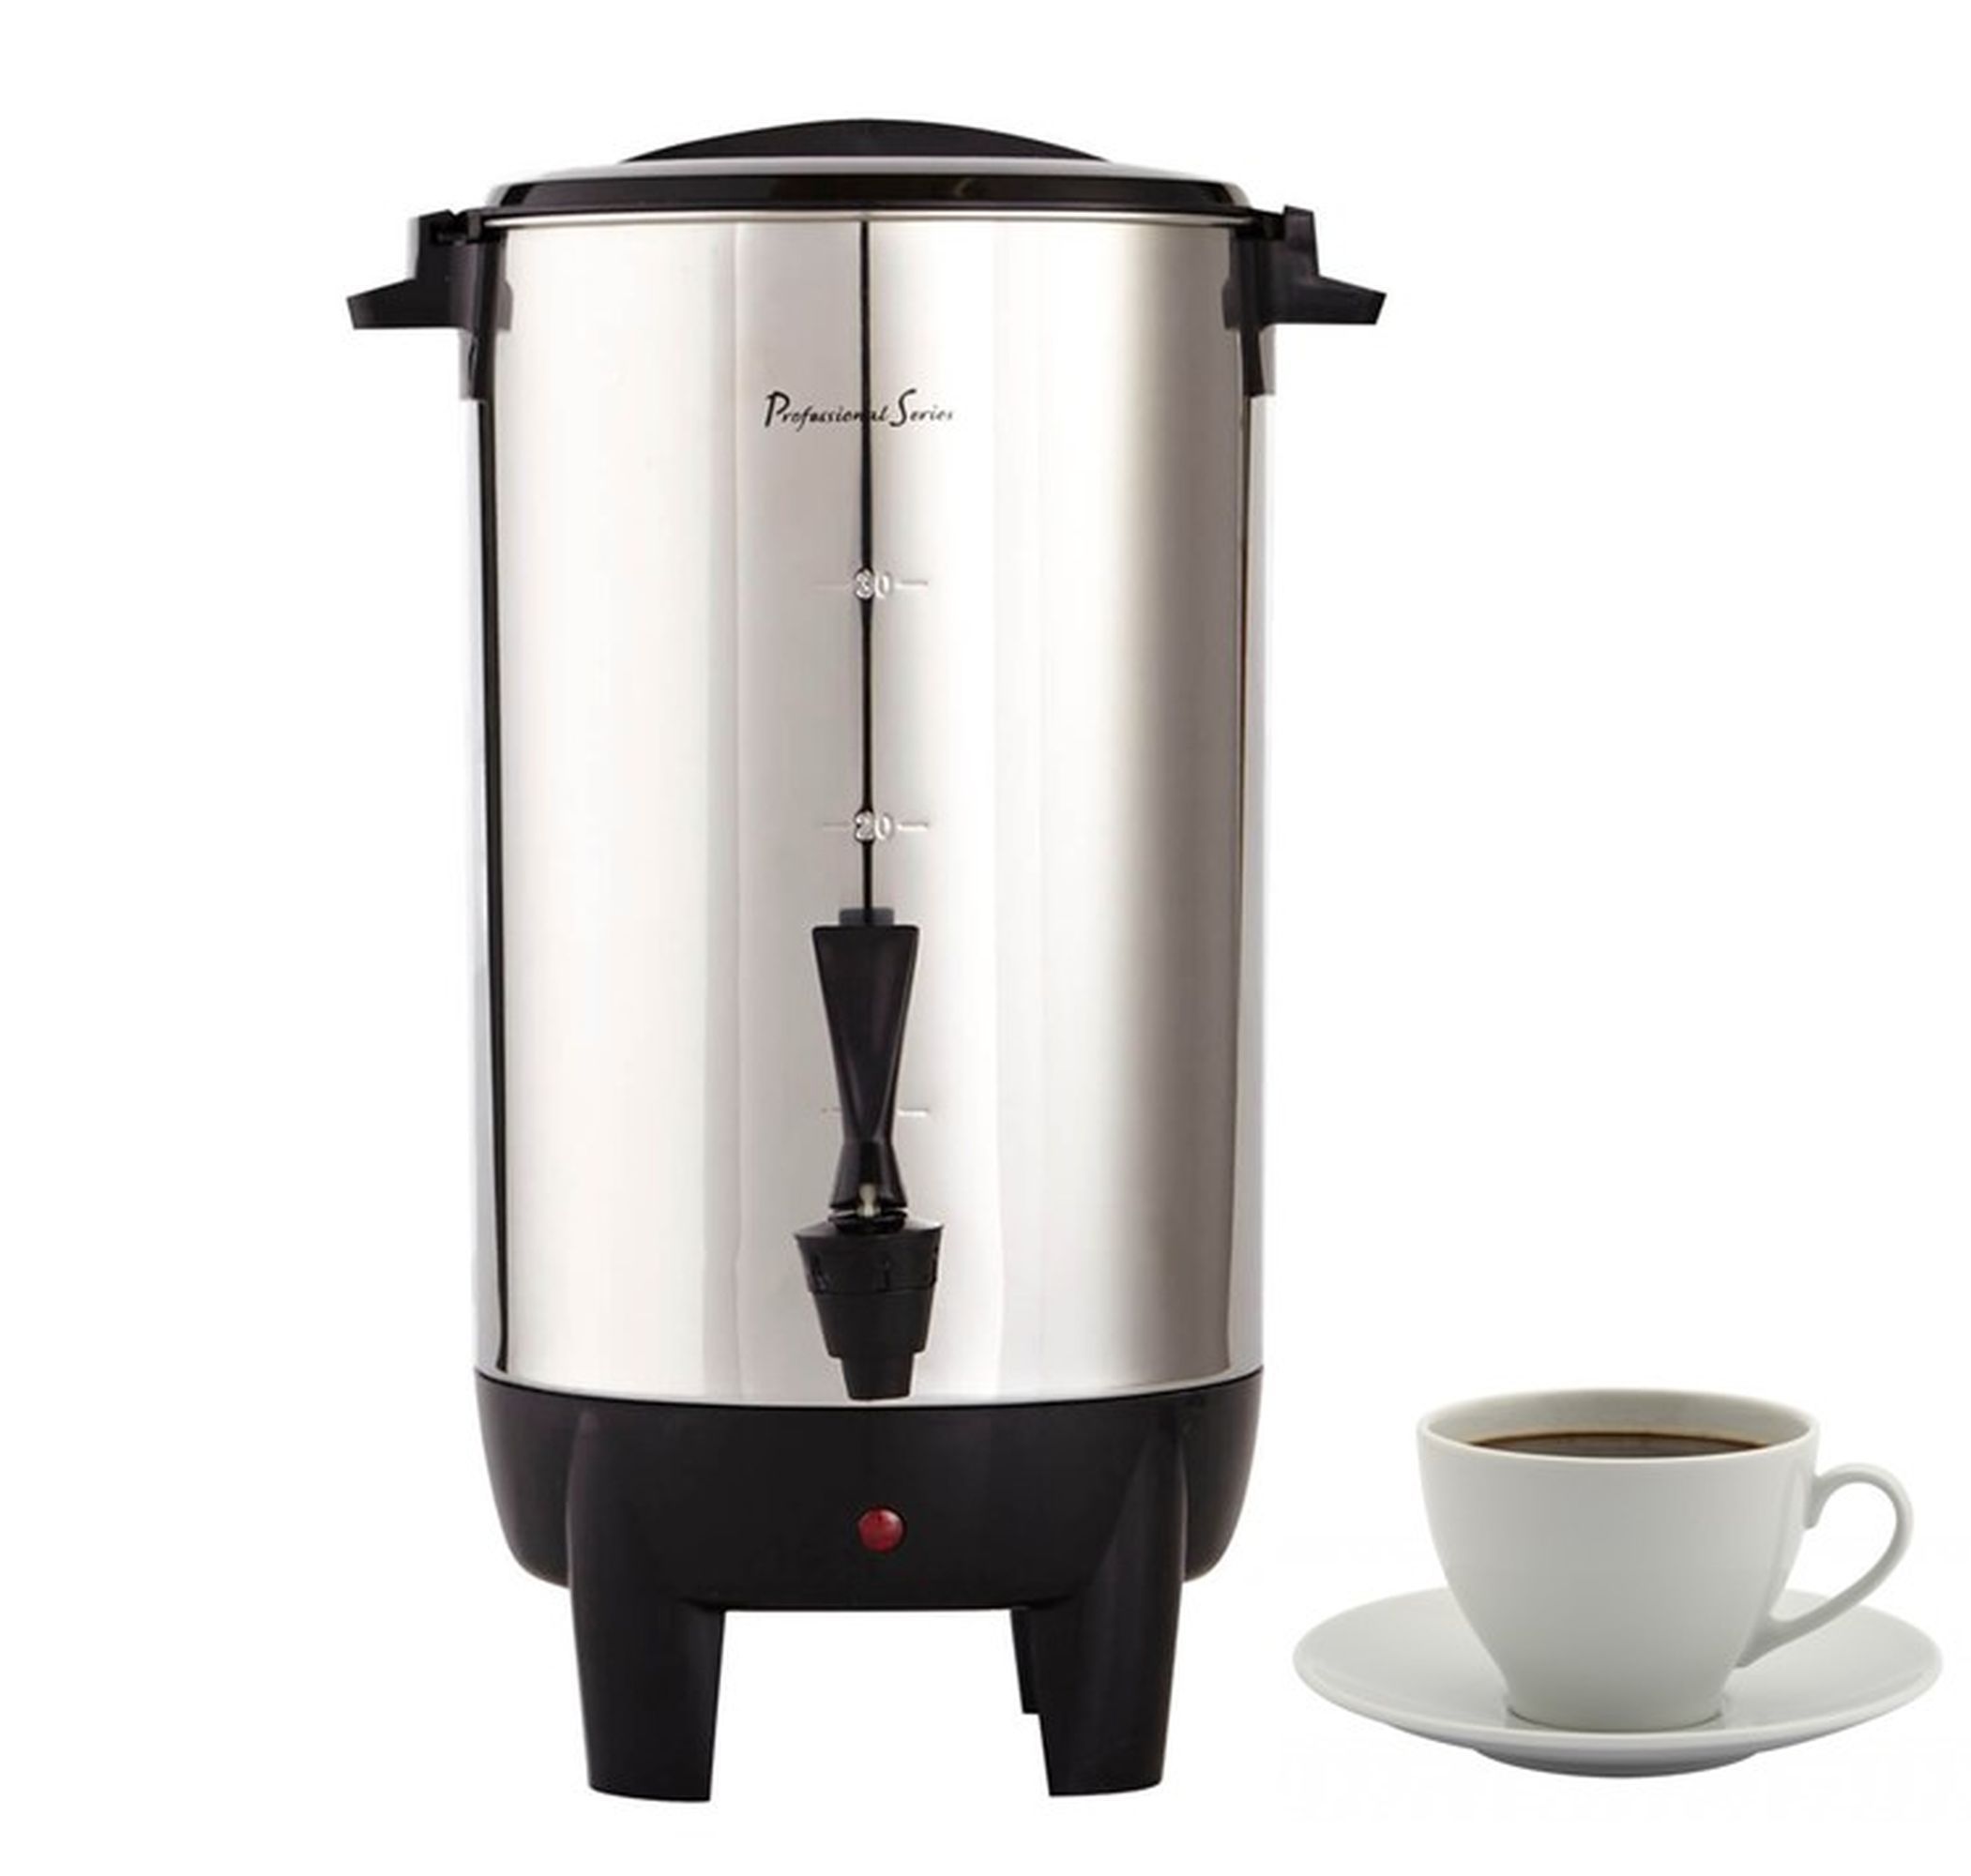 How to Make Coffee in a Coffee Urn - Professional Series